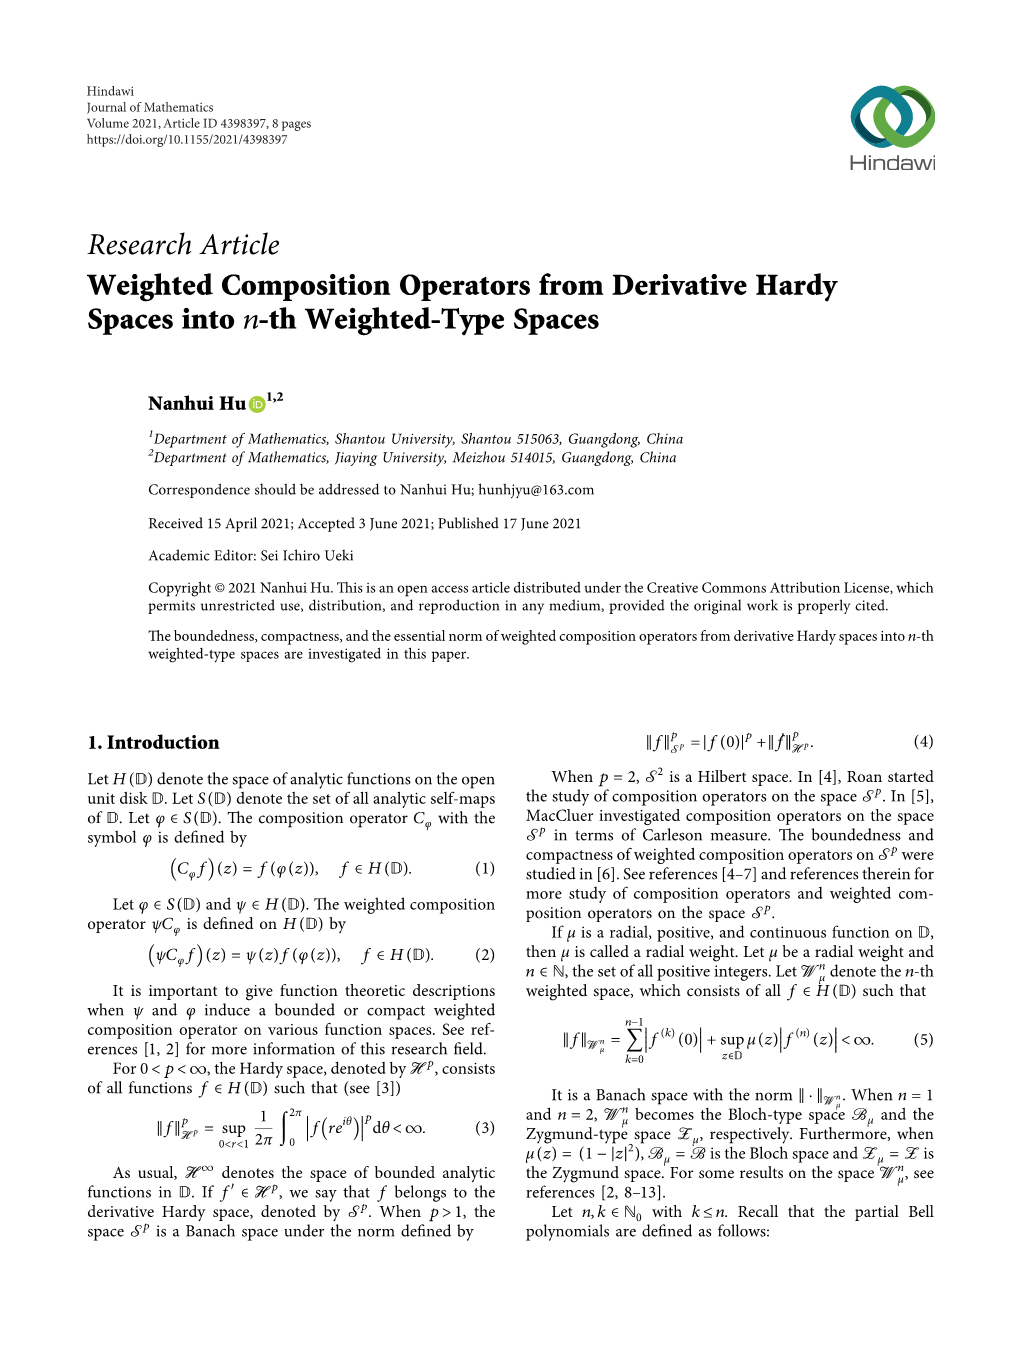 Weighted Composition Operators from Derivative Hardy Spaces Into N-Th Weighted-Type Spaces